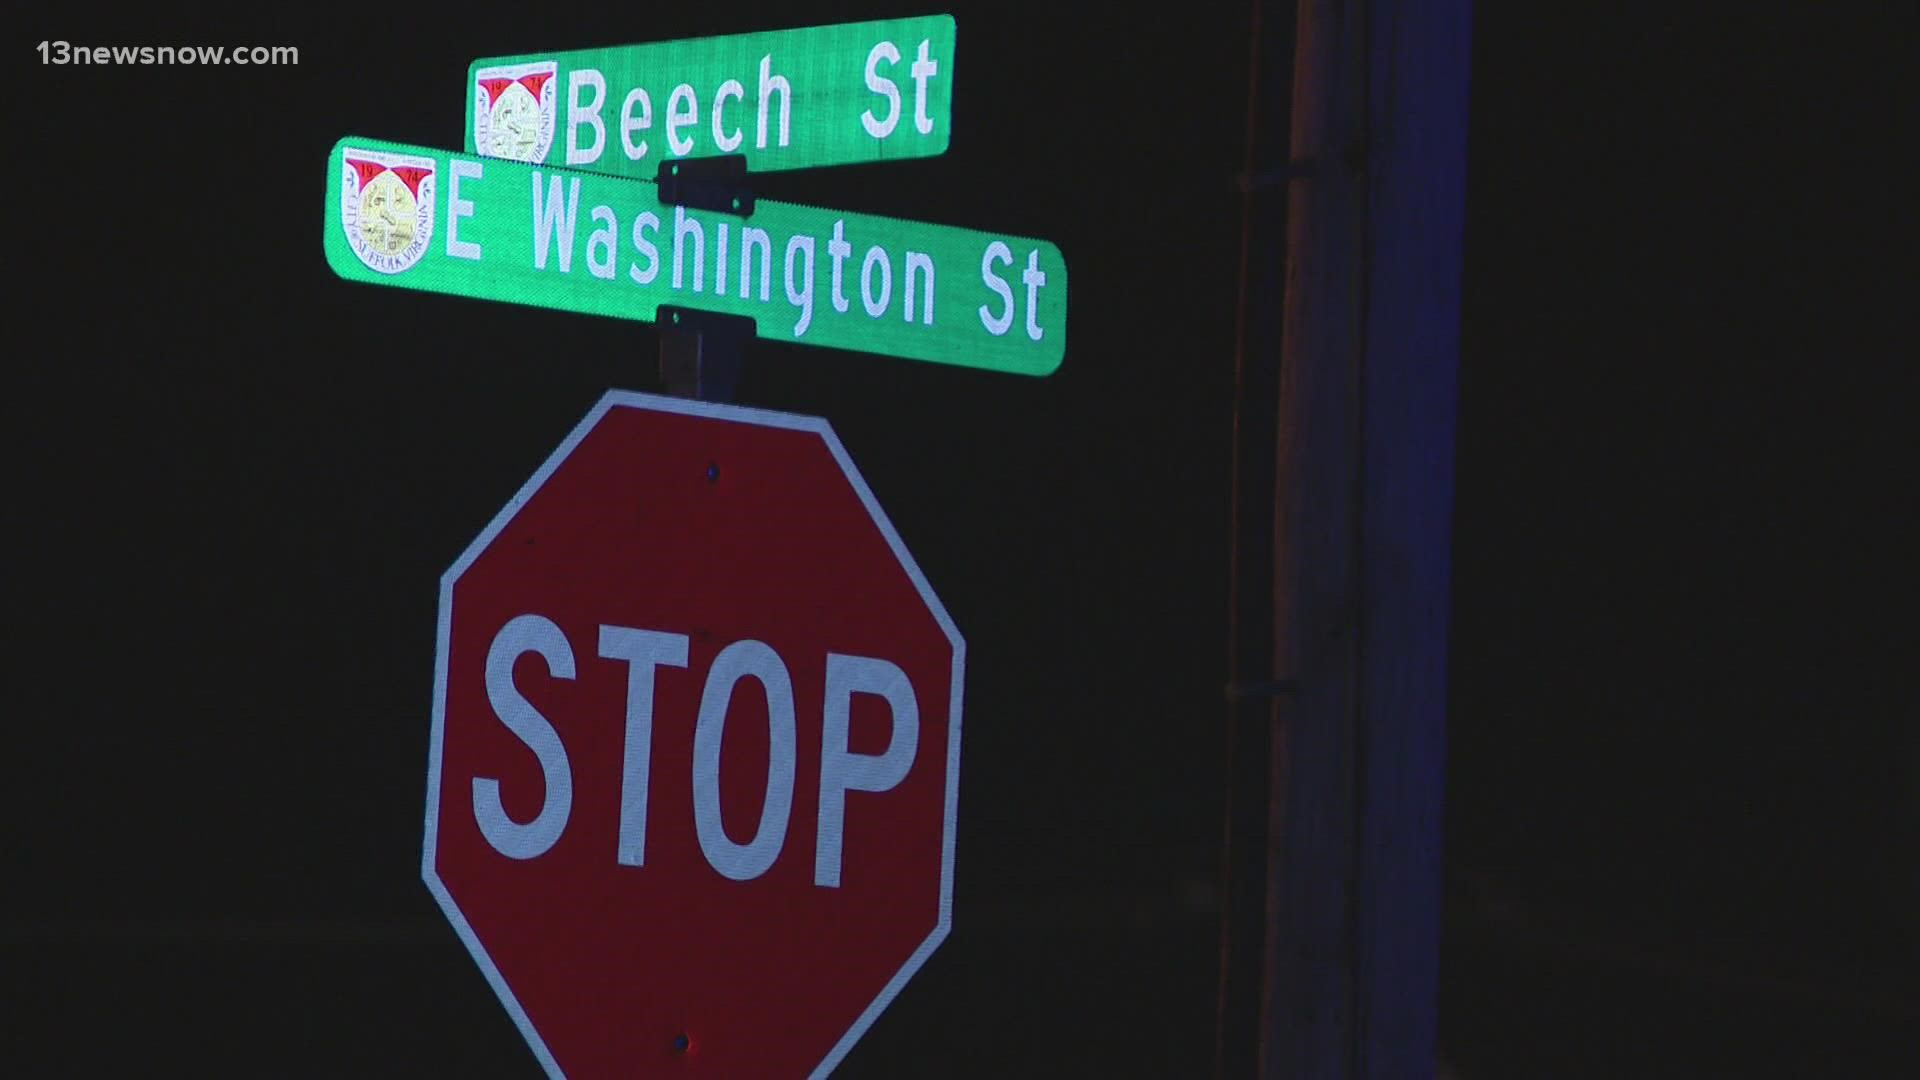 Early in the morning, officers went to the 100 block of Beech Street, which is near Balm Church on East Washington Street, and found a 35-year-old man who was hurt.